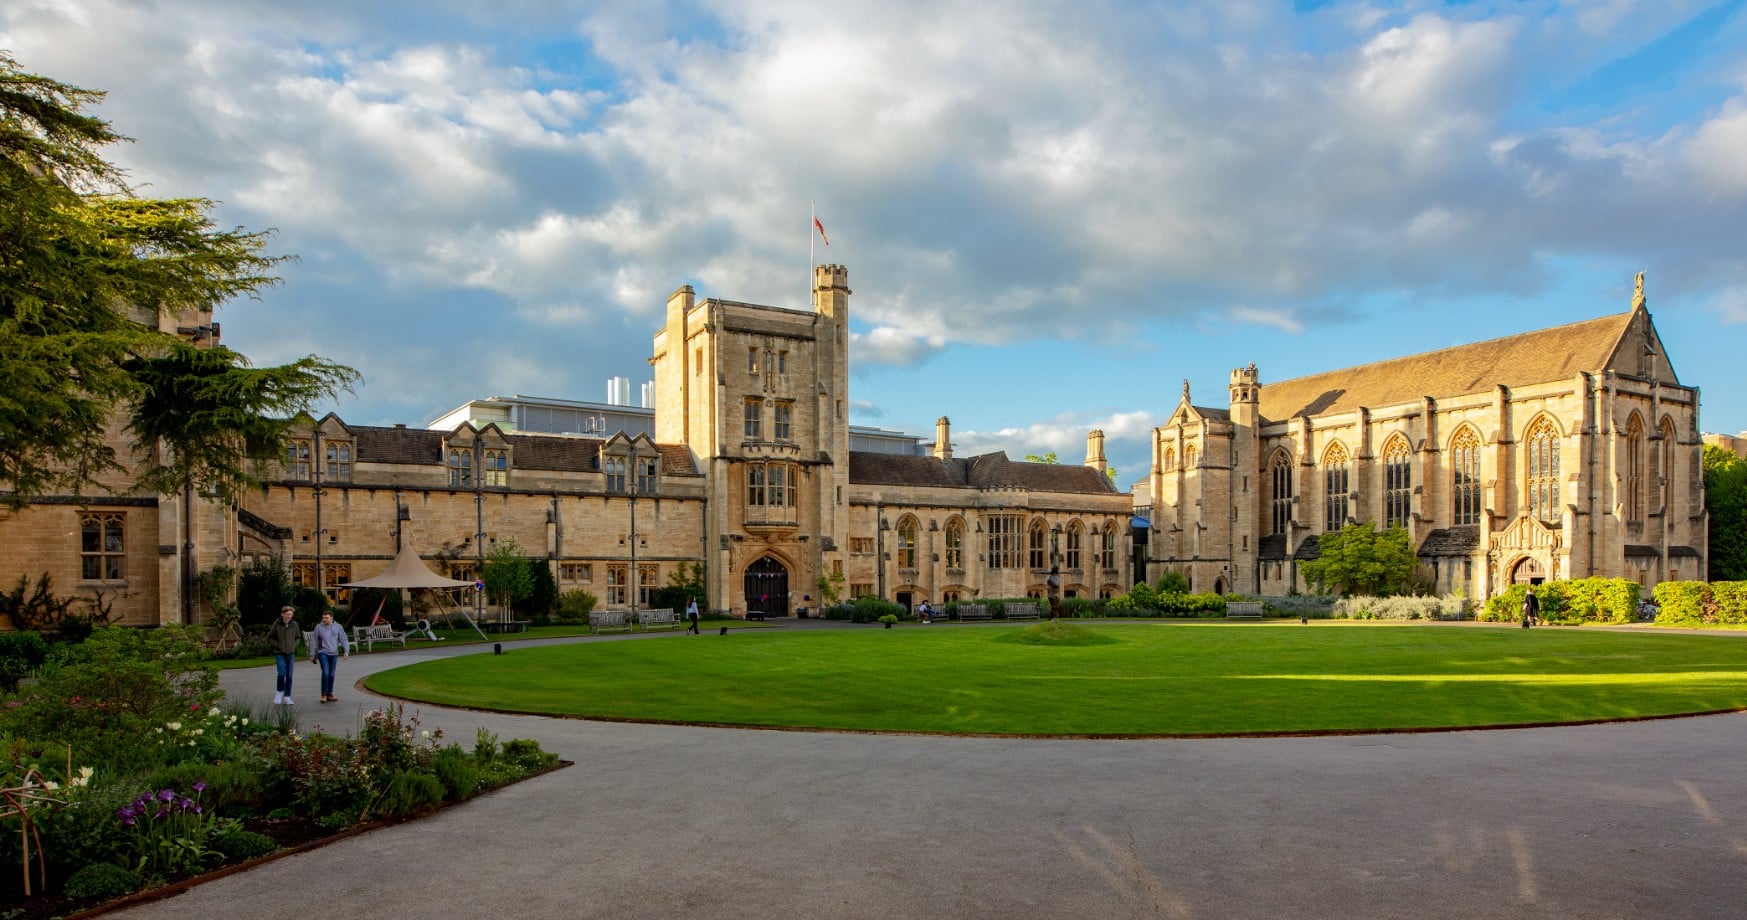 Mansfield College with the quad in the foreground